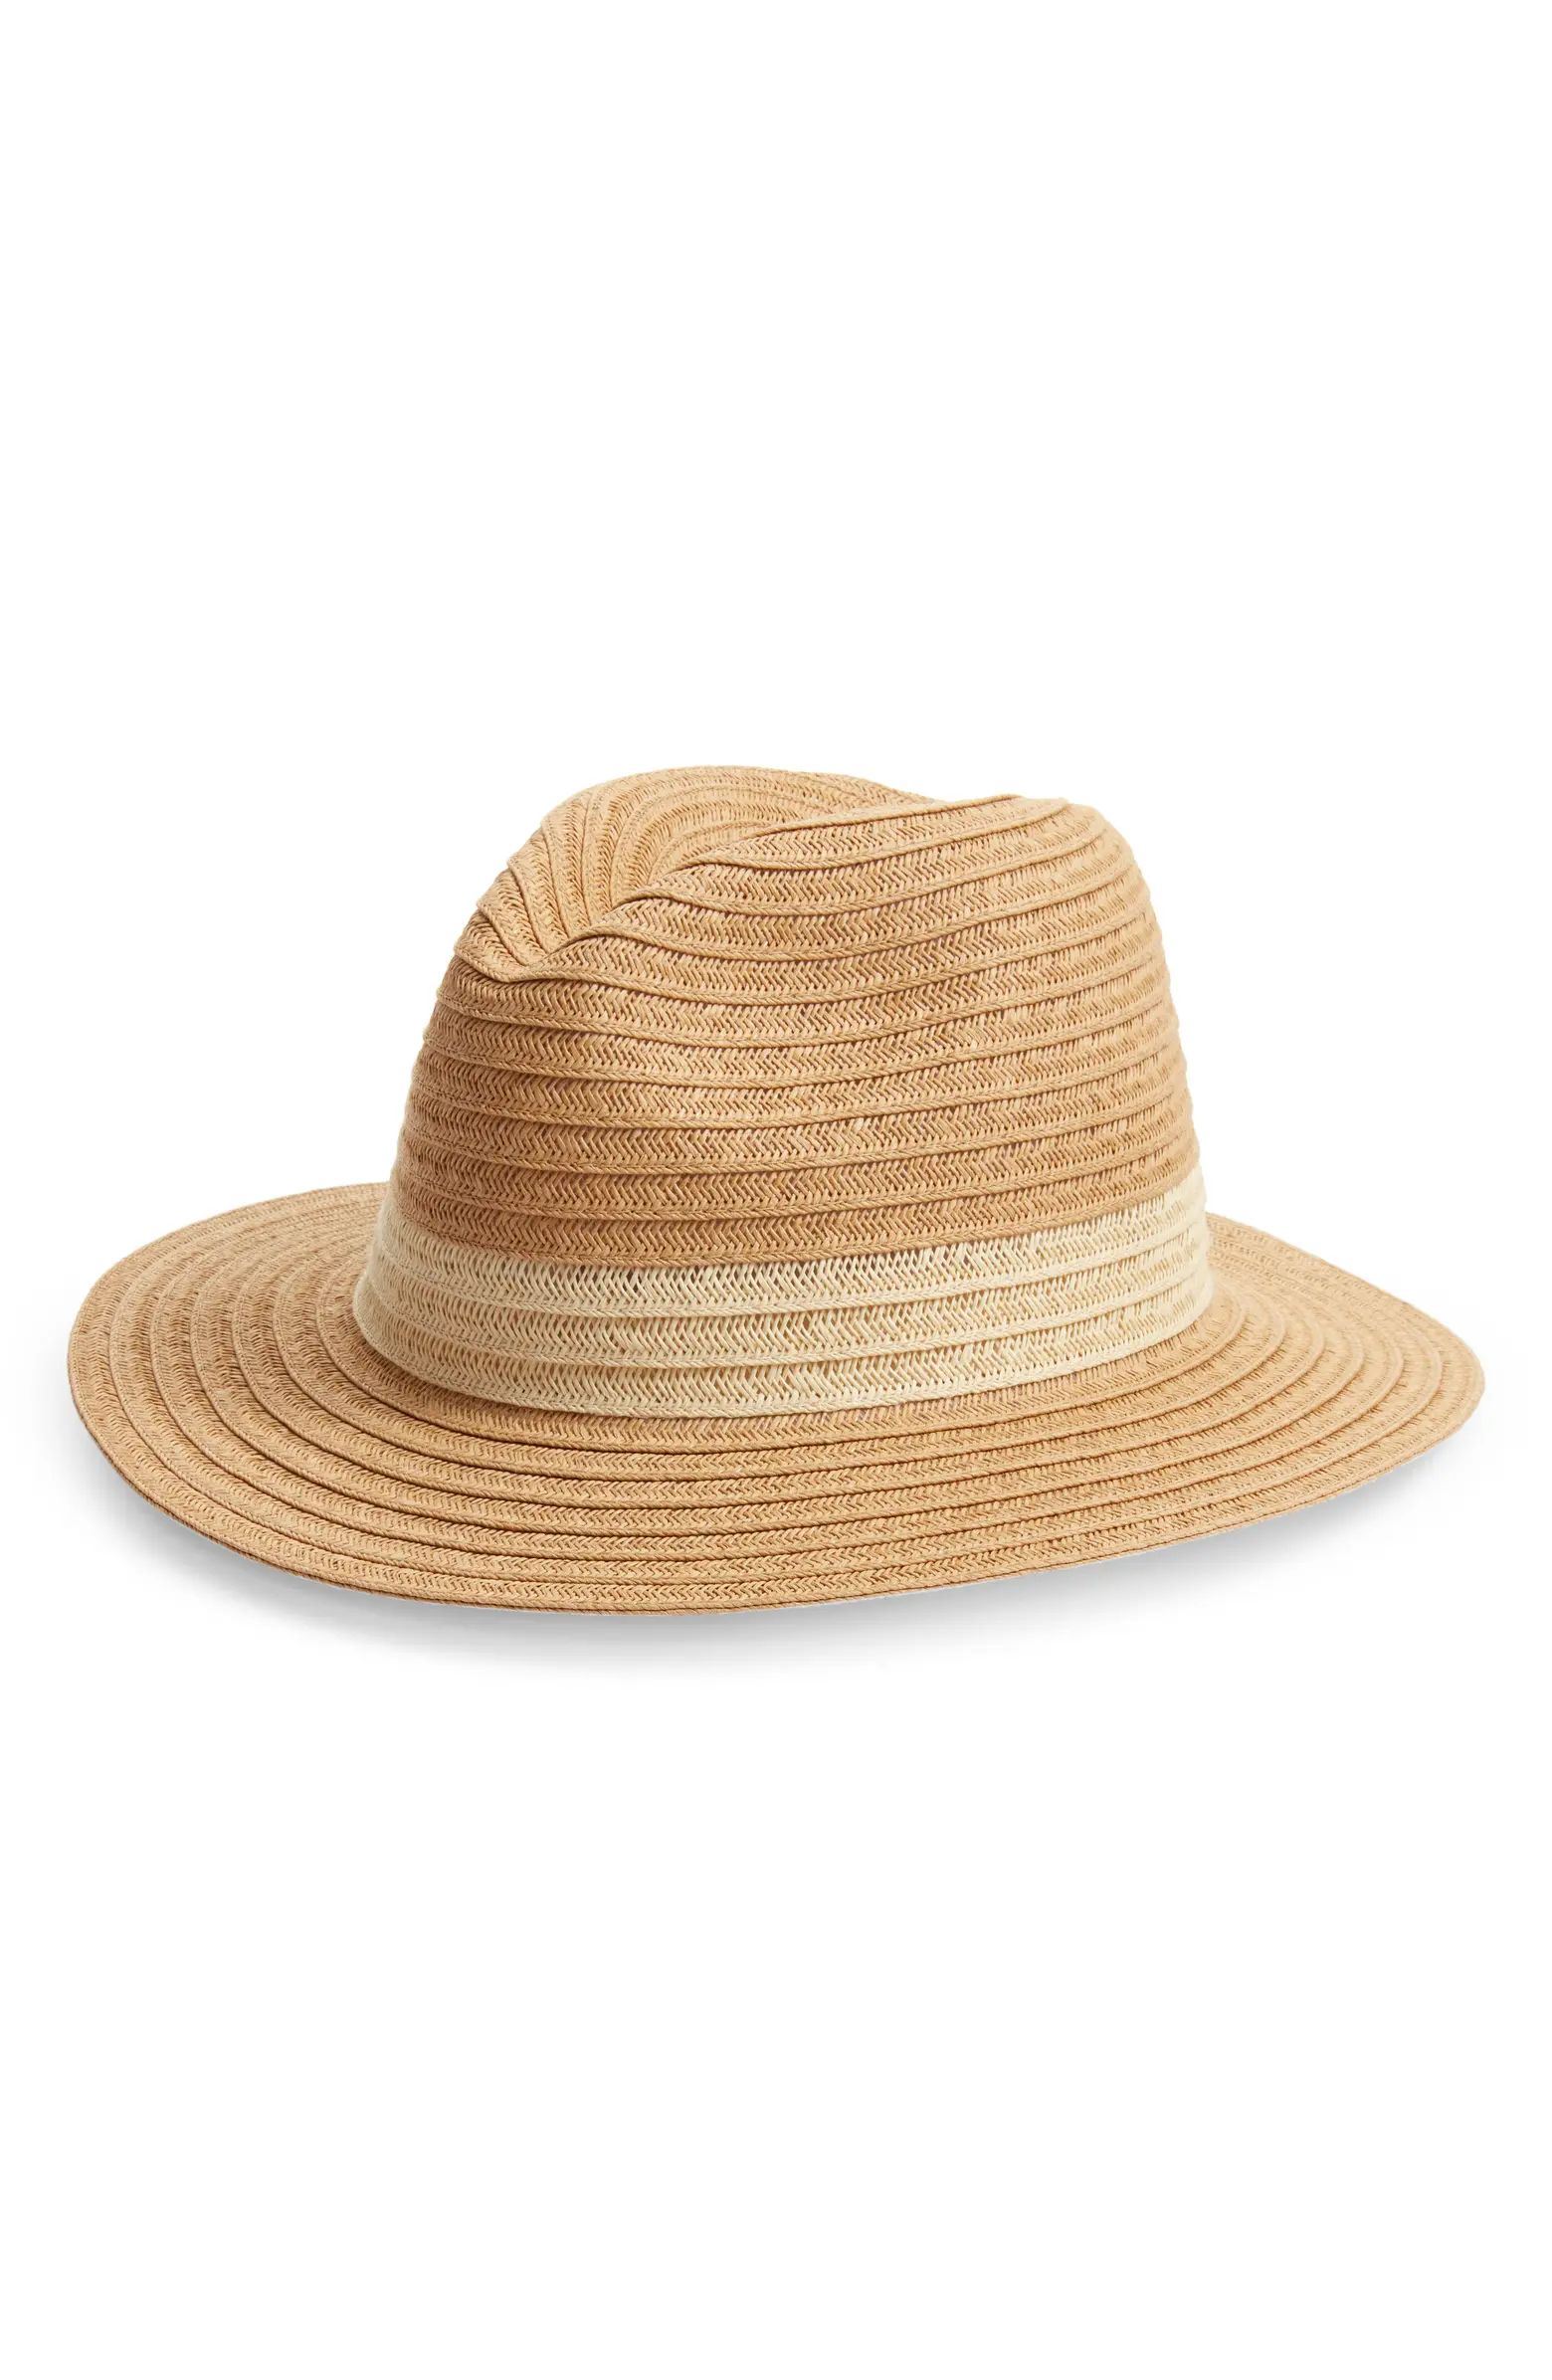 Packable Colorblock Braided Paper Straw Panama Hat | Nordstrom